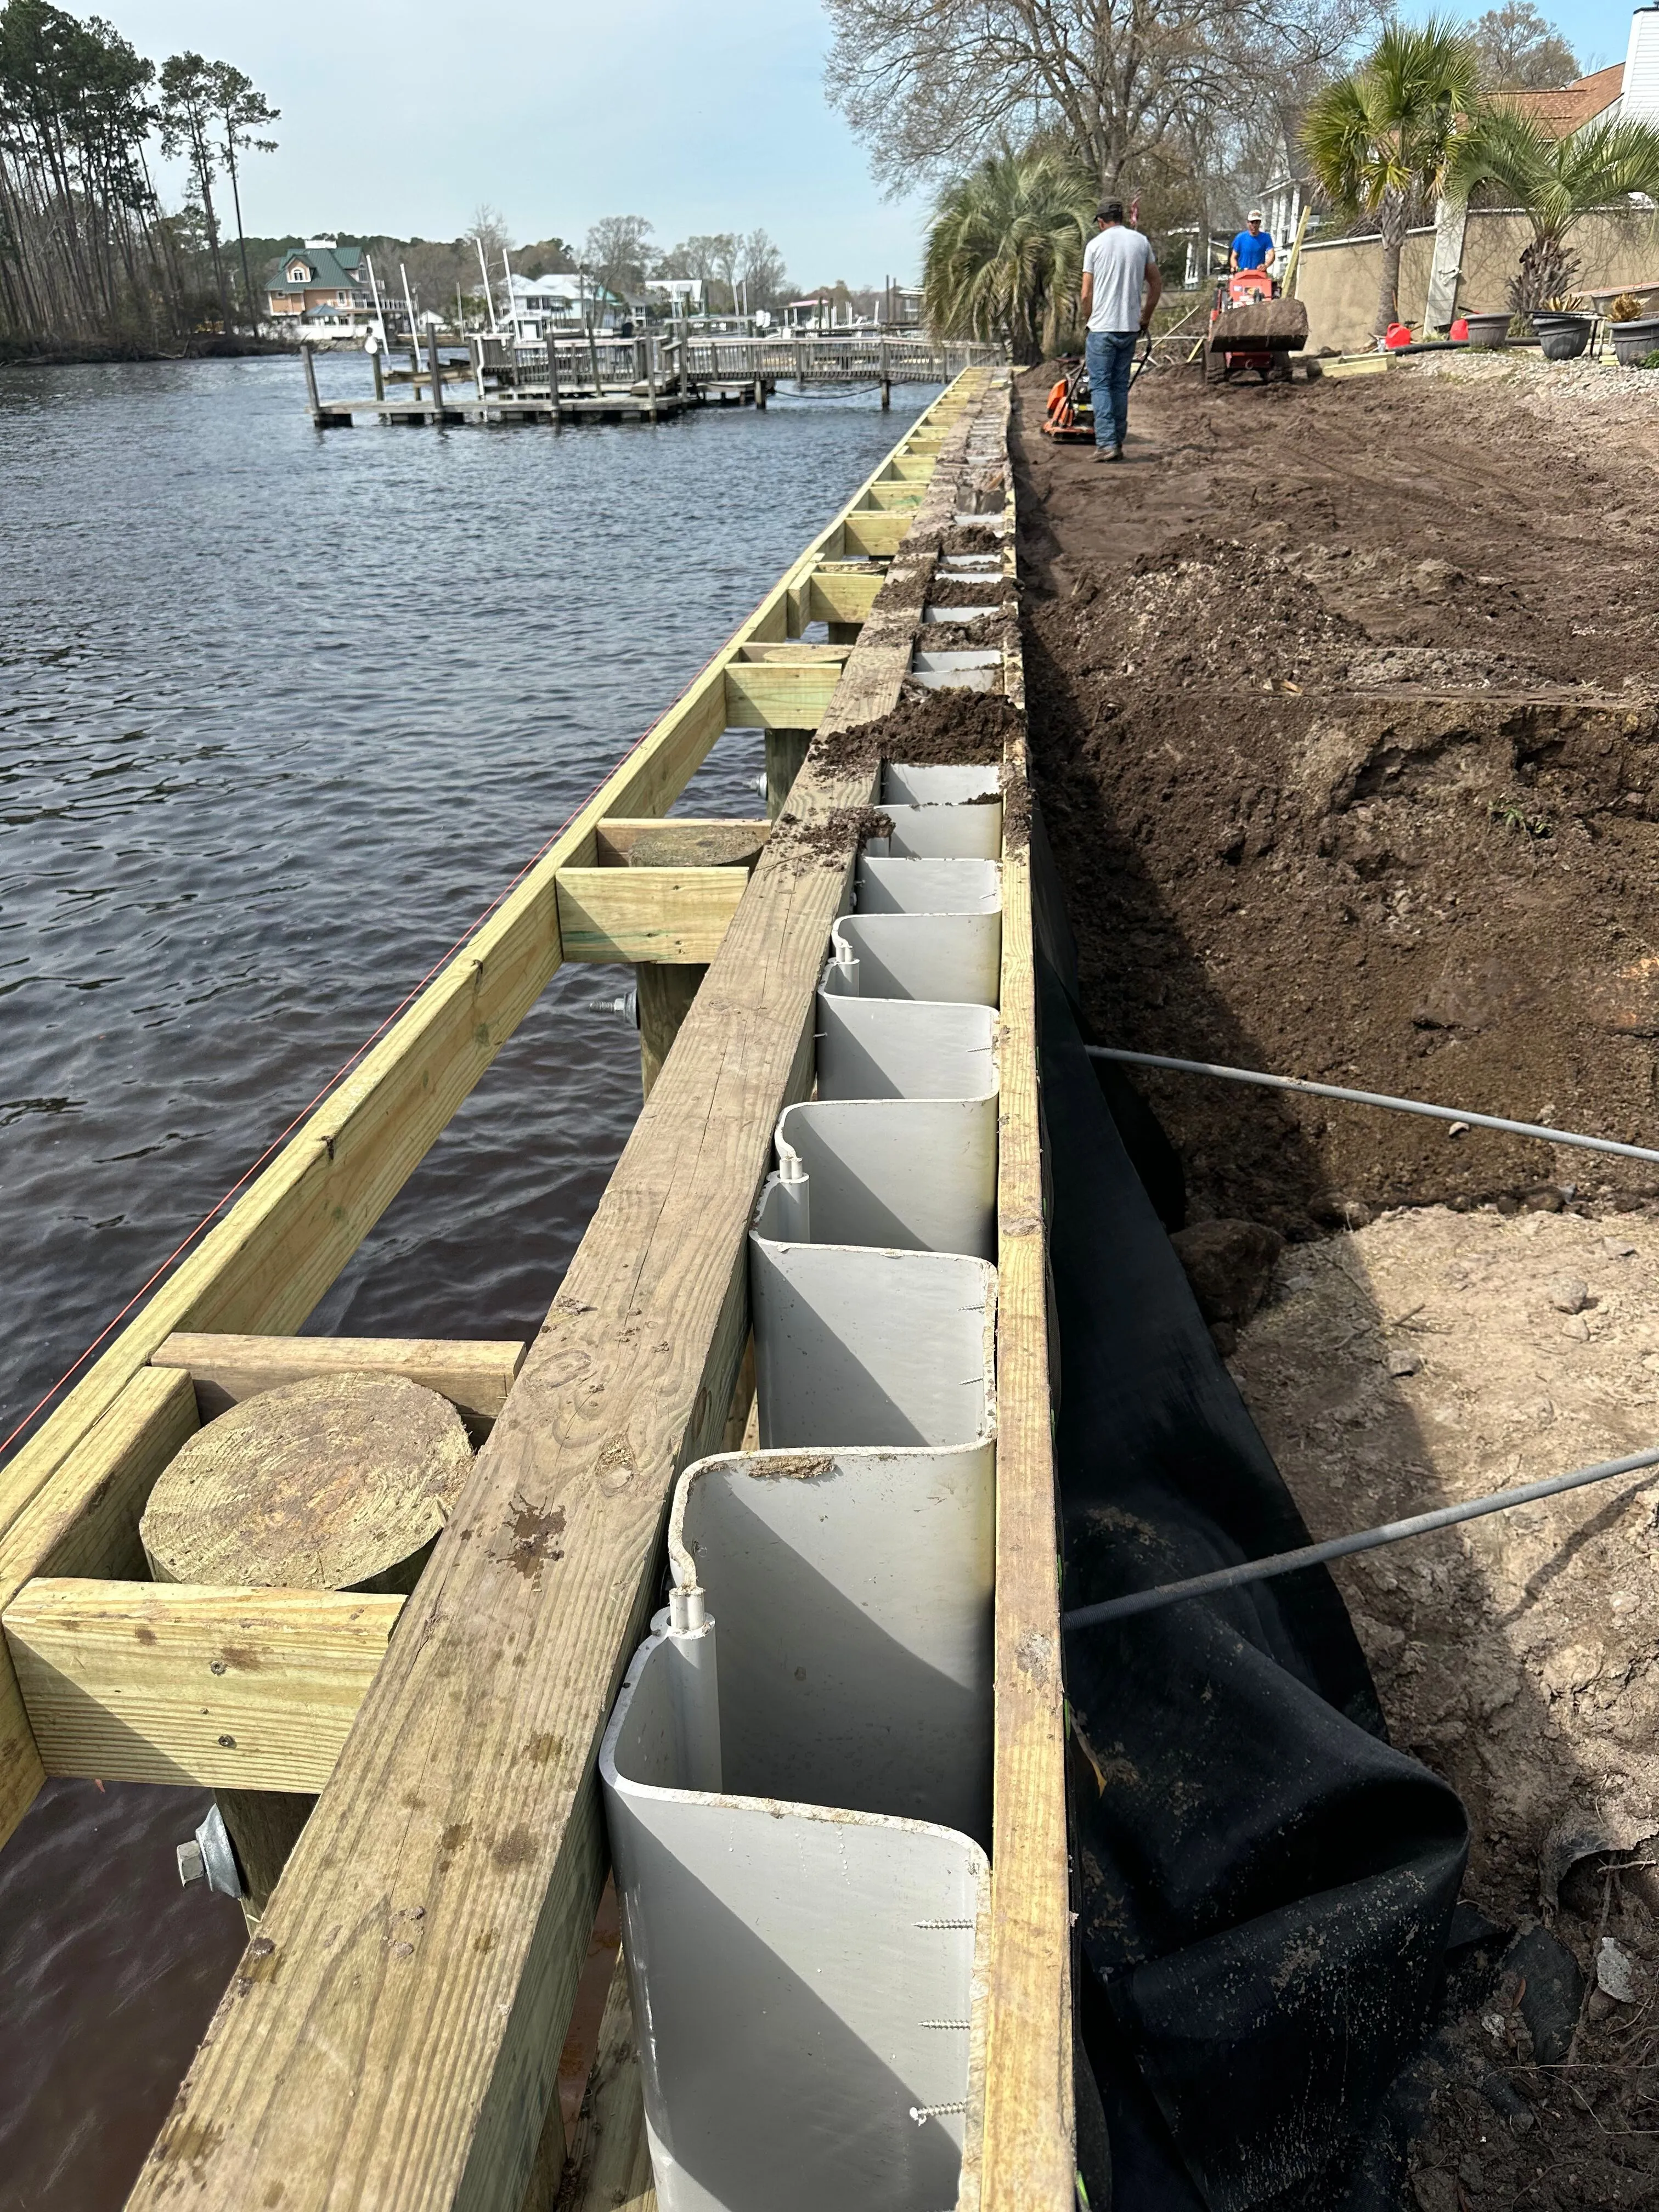 Vinyl Bulkhead framed out for composite wood cap under construction in Myrtle Beach SC on the Intracoastal Waterway built by Waterbridge Contractors of the Carolinas